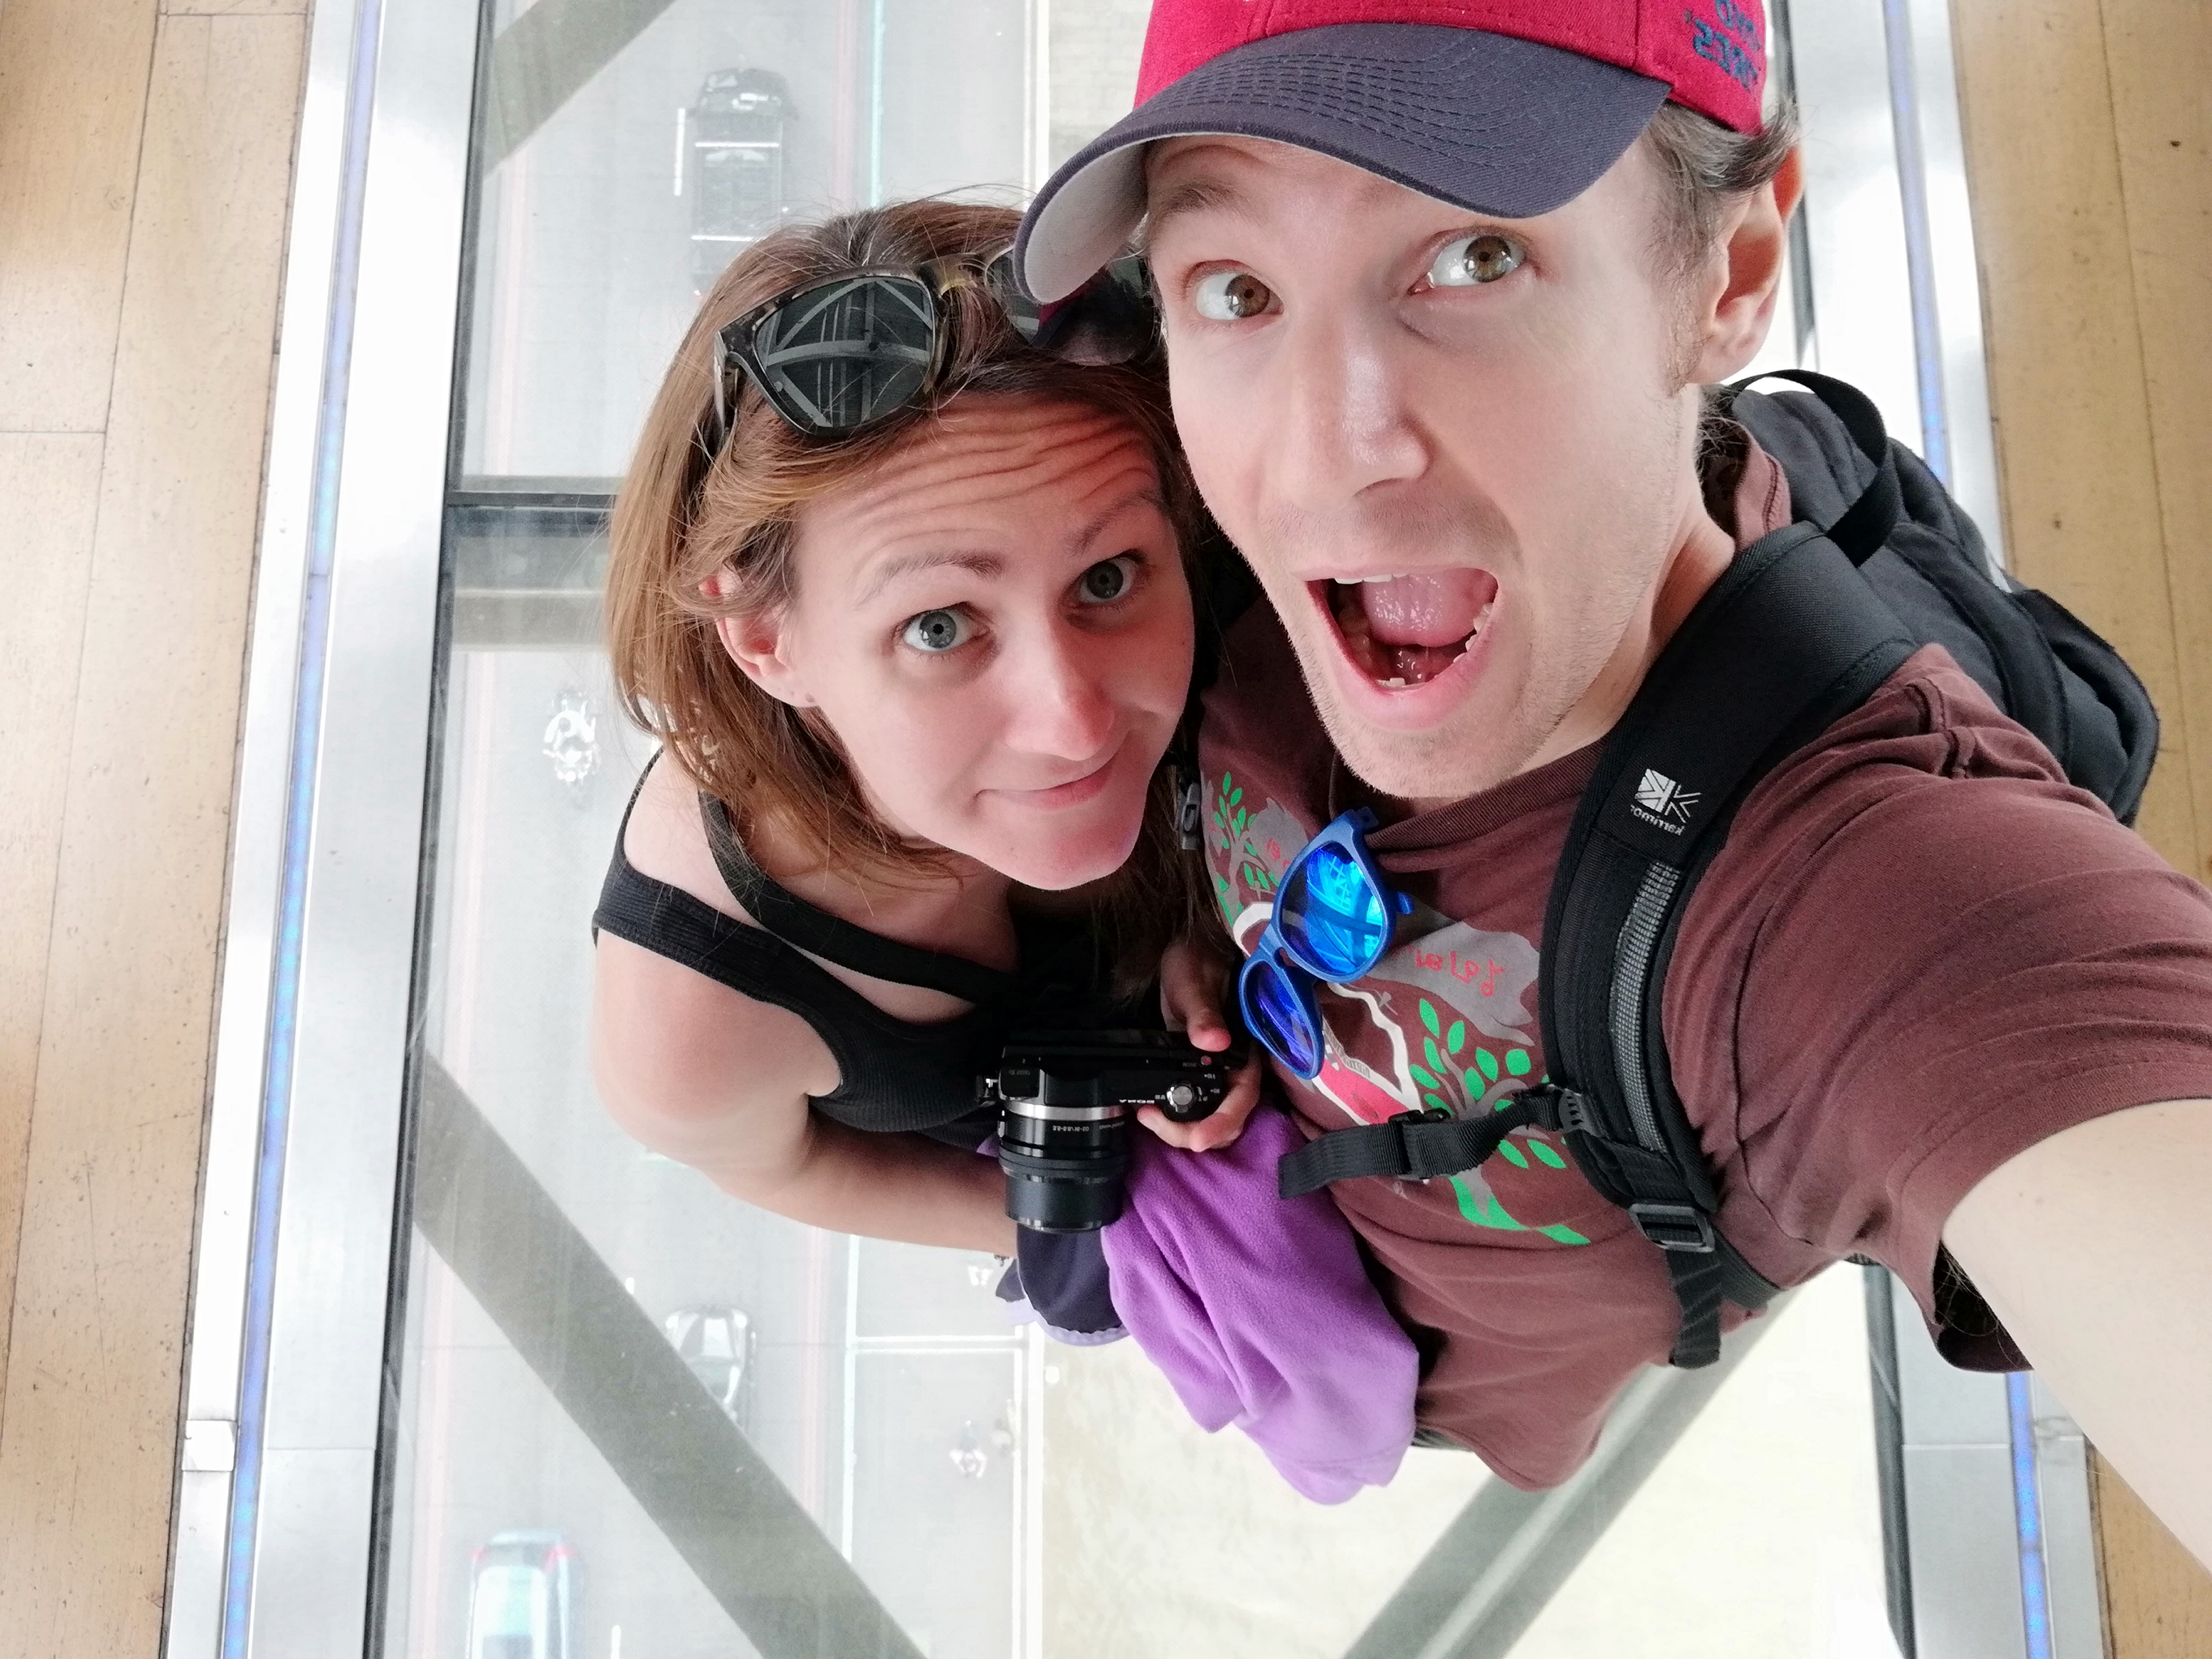 Us on the glass walkway at Tower Bridge in London